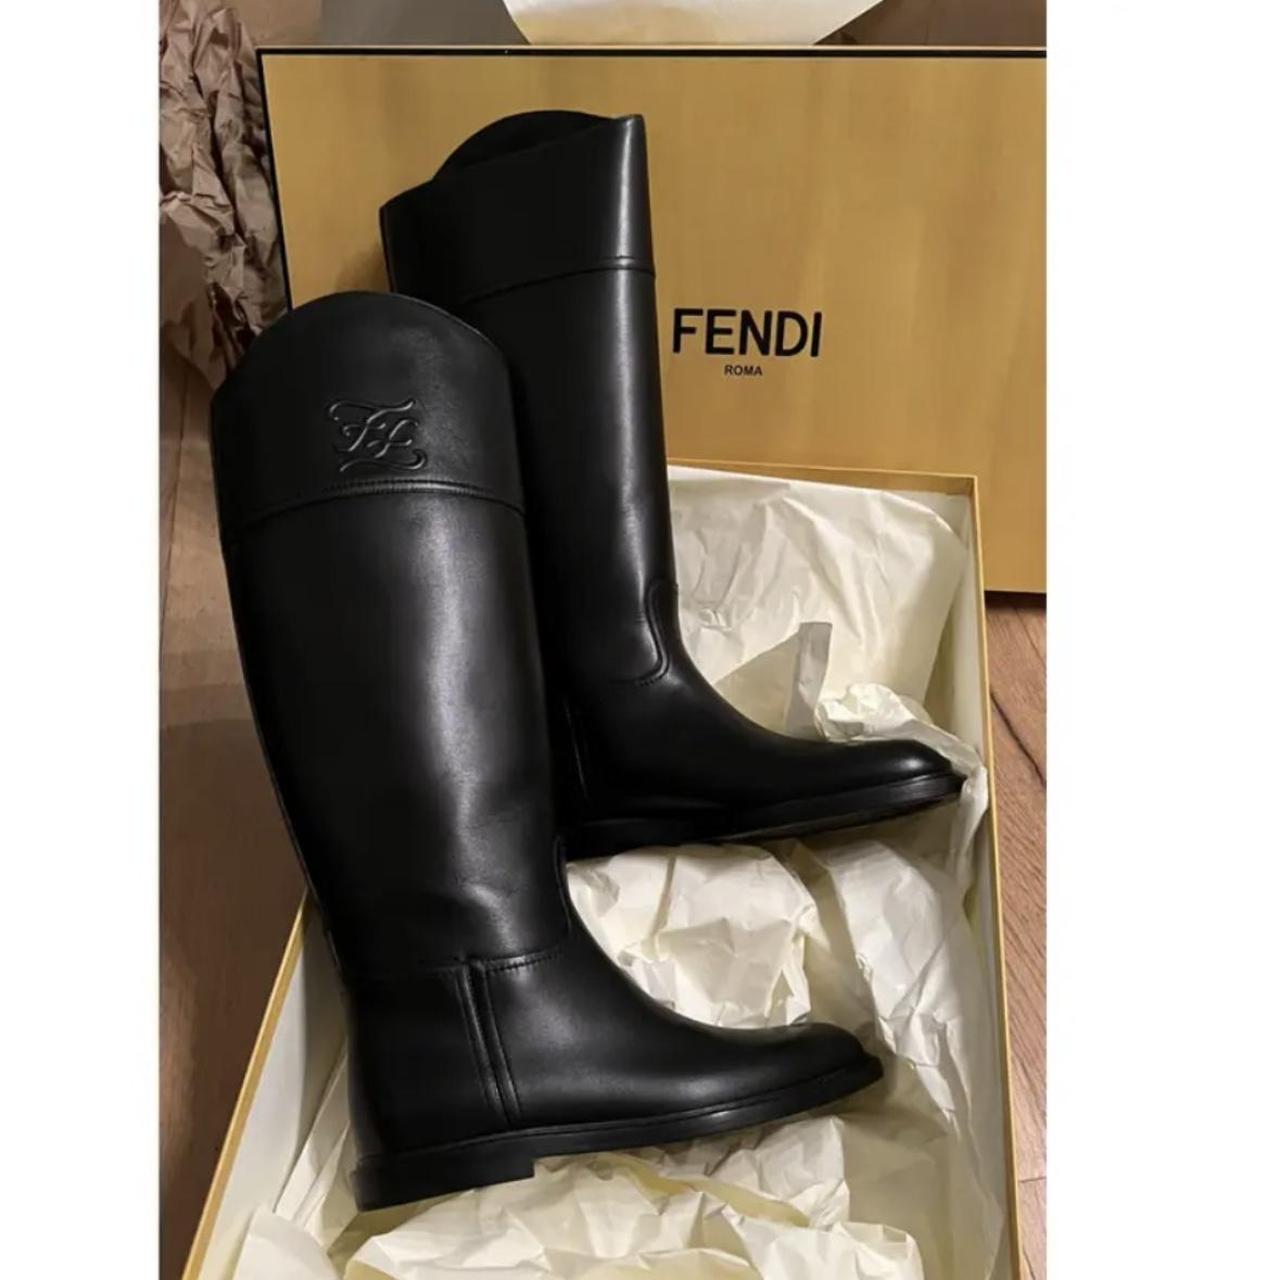 FENDI leather boots Full packaging - never used.... - Depop